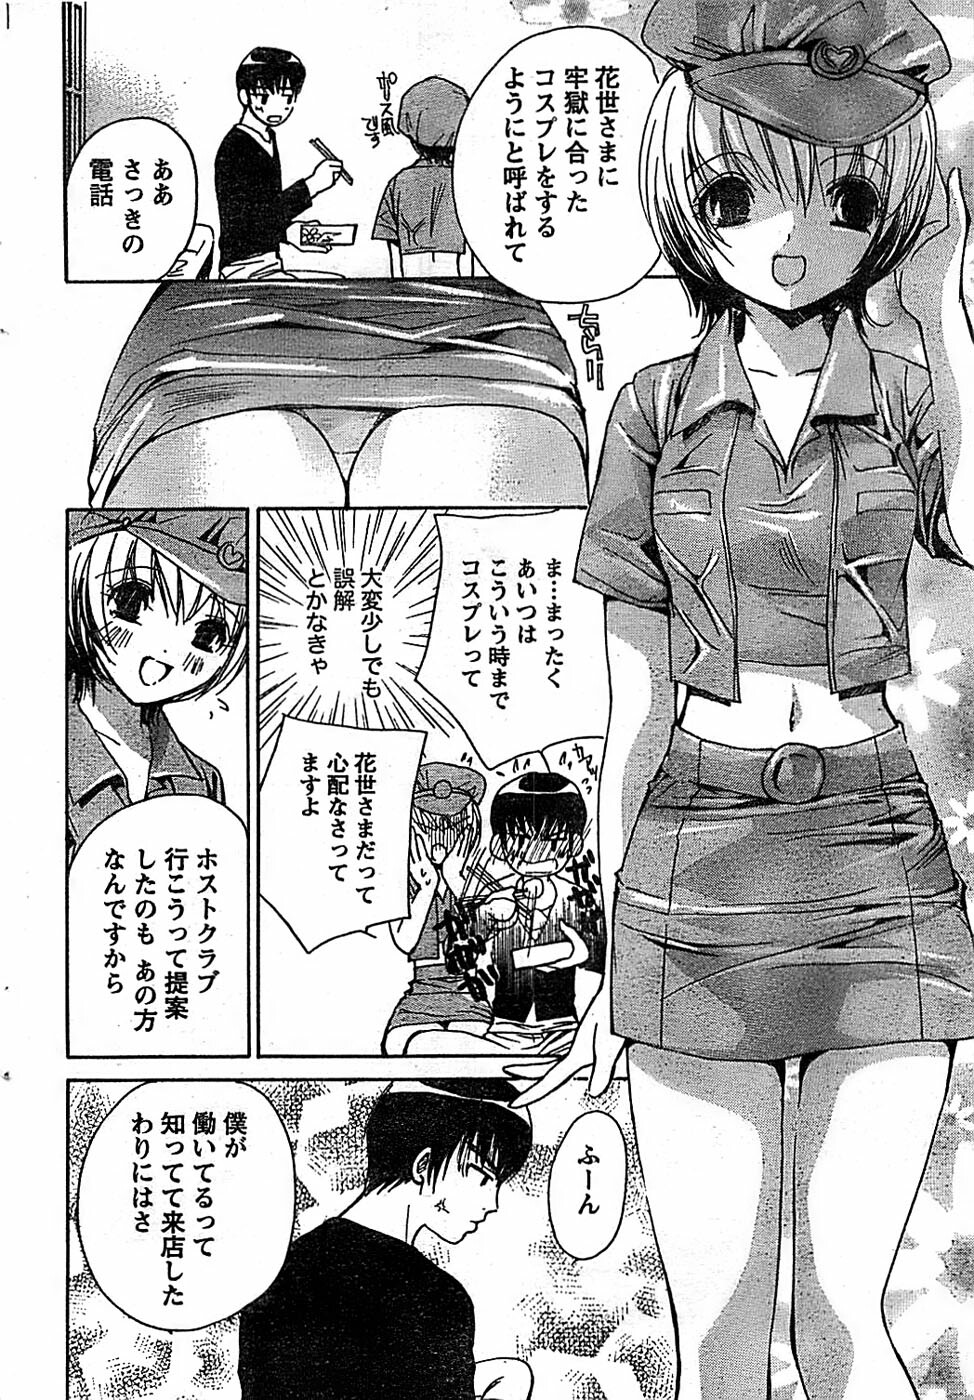 Doki! Special 2008-01 page 46 full